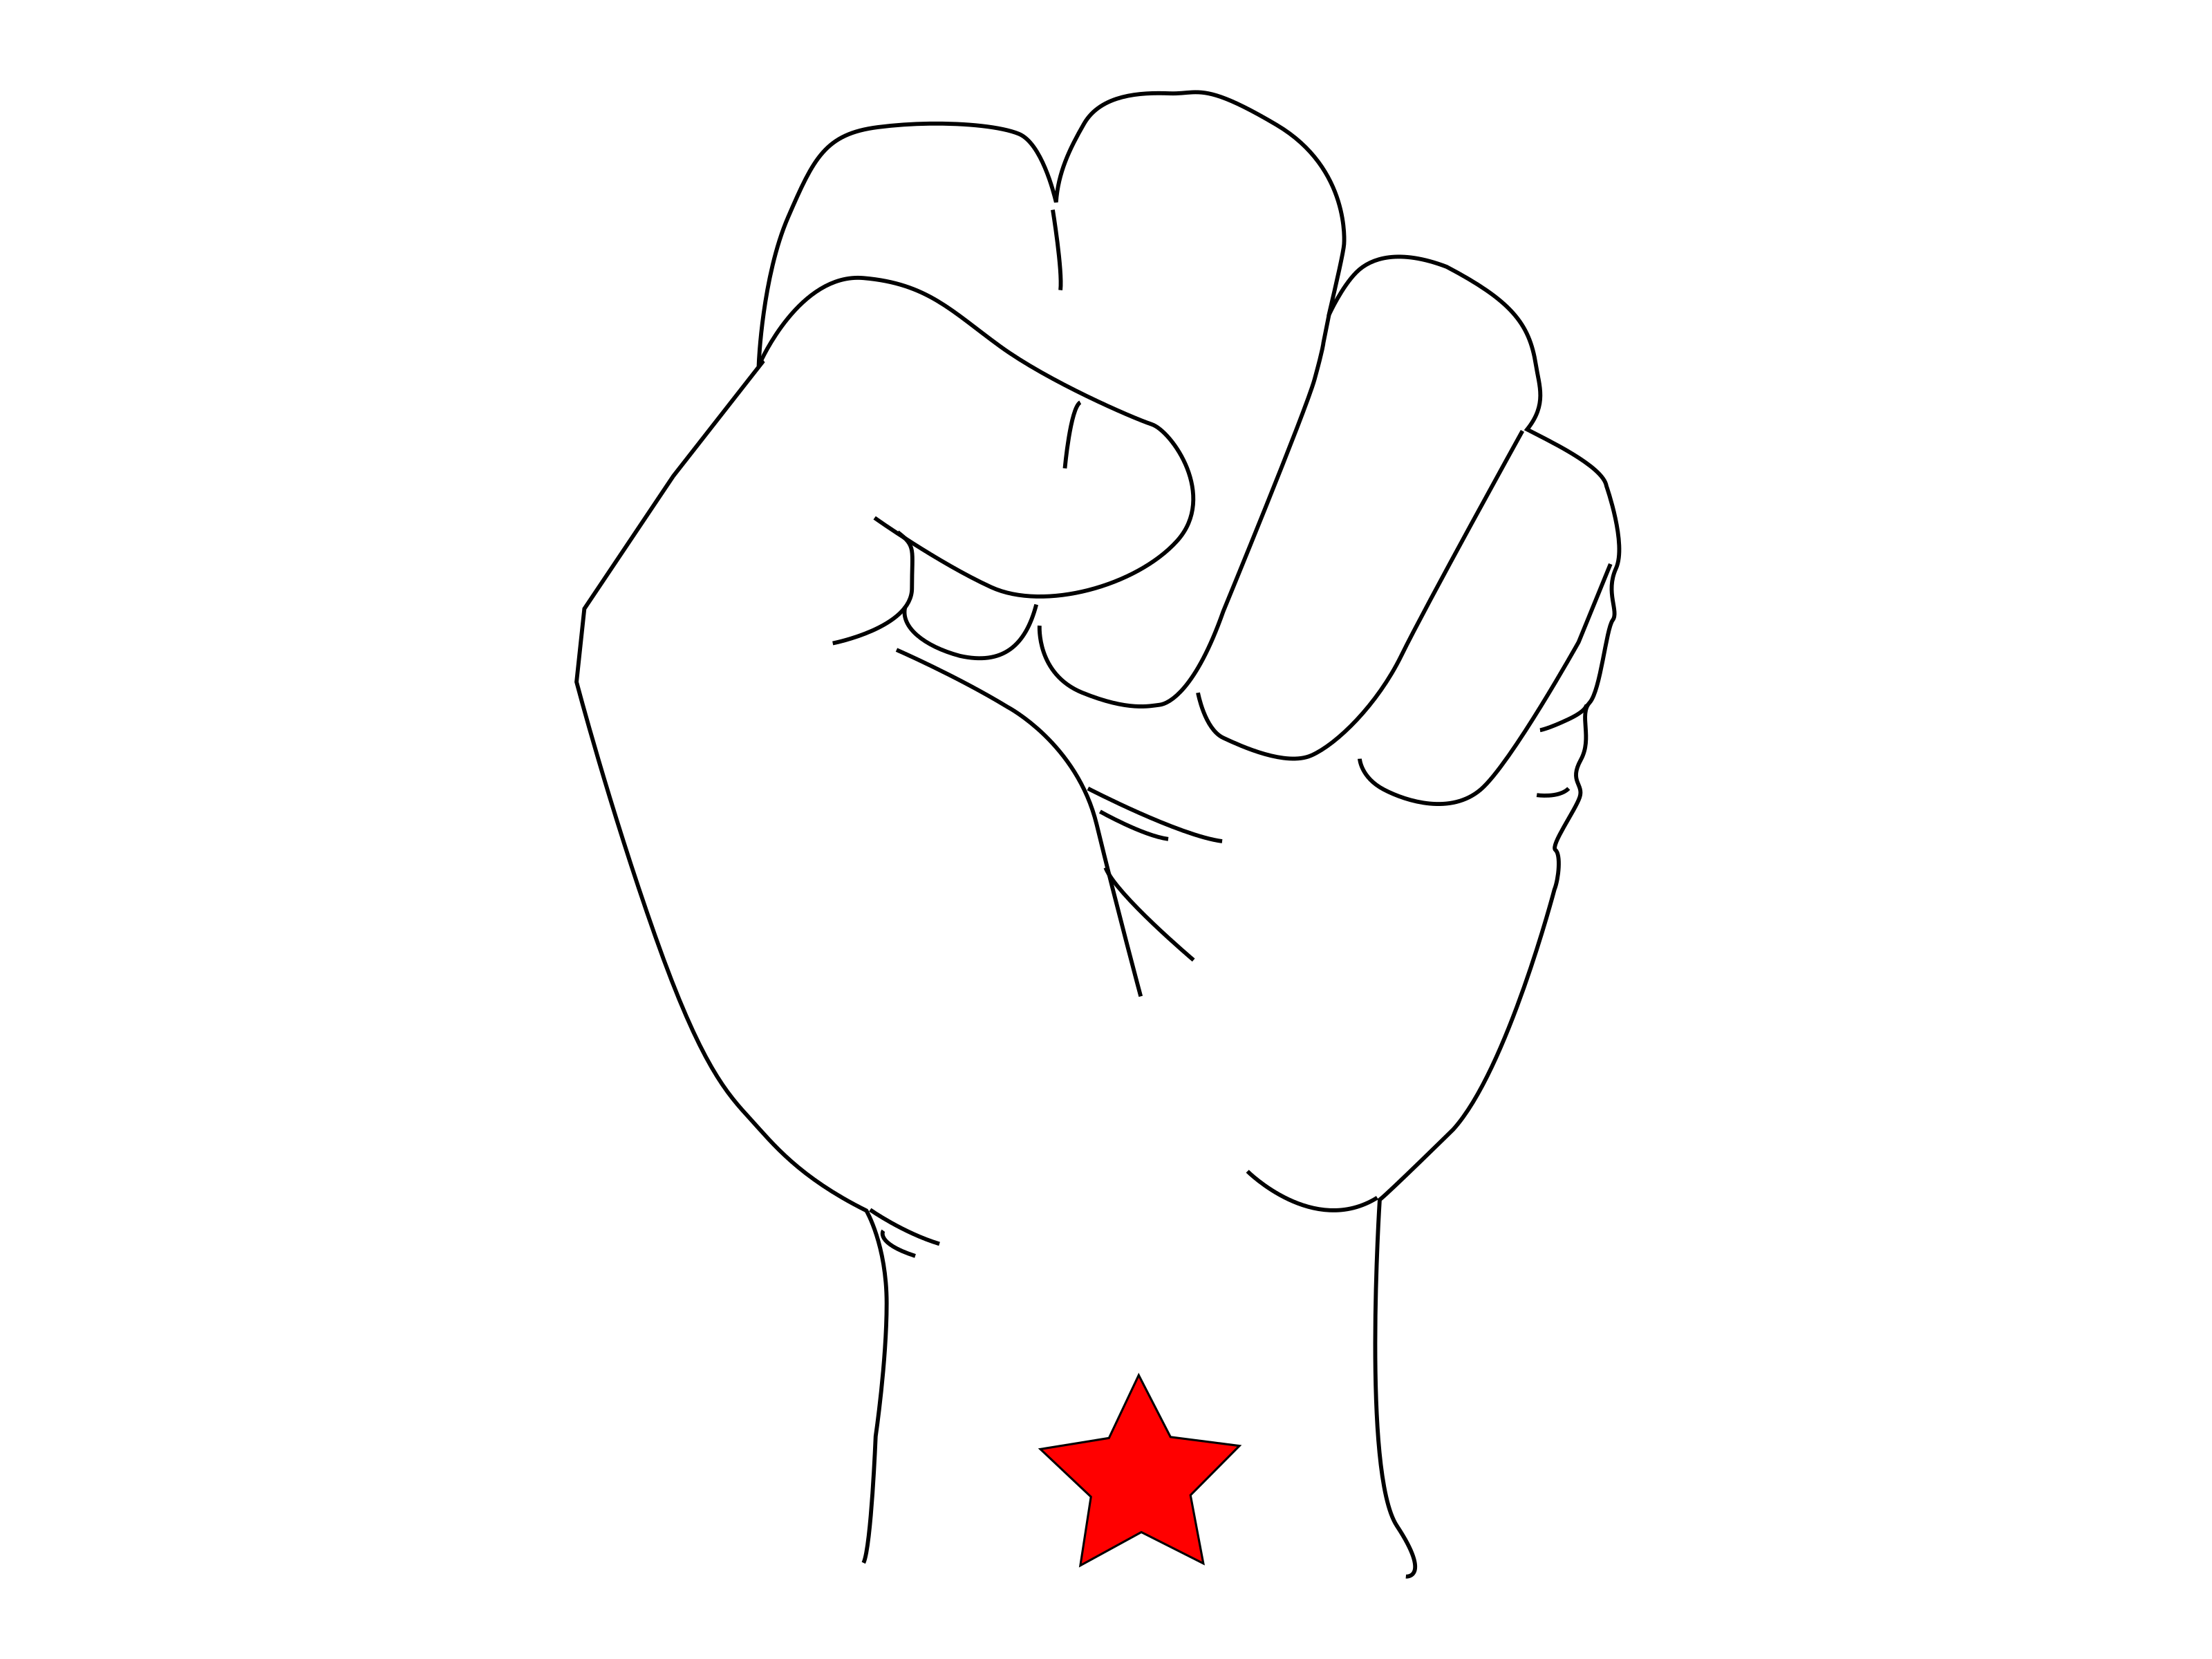 Fist clipart revolution fist. Icons png free and